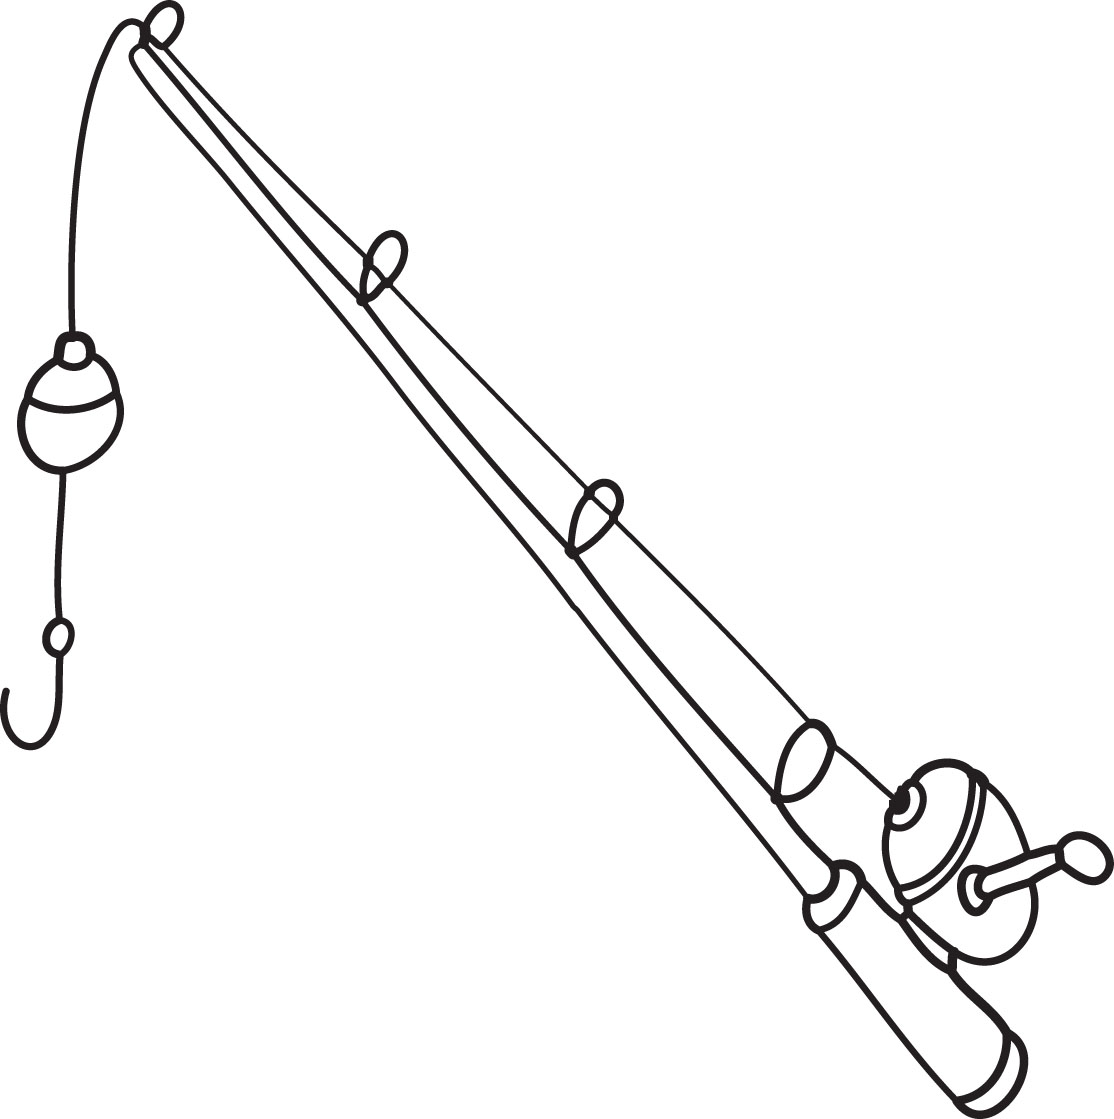 Fishing Rod Coloring Page - ClipArt Best